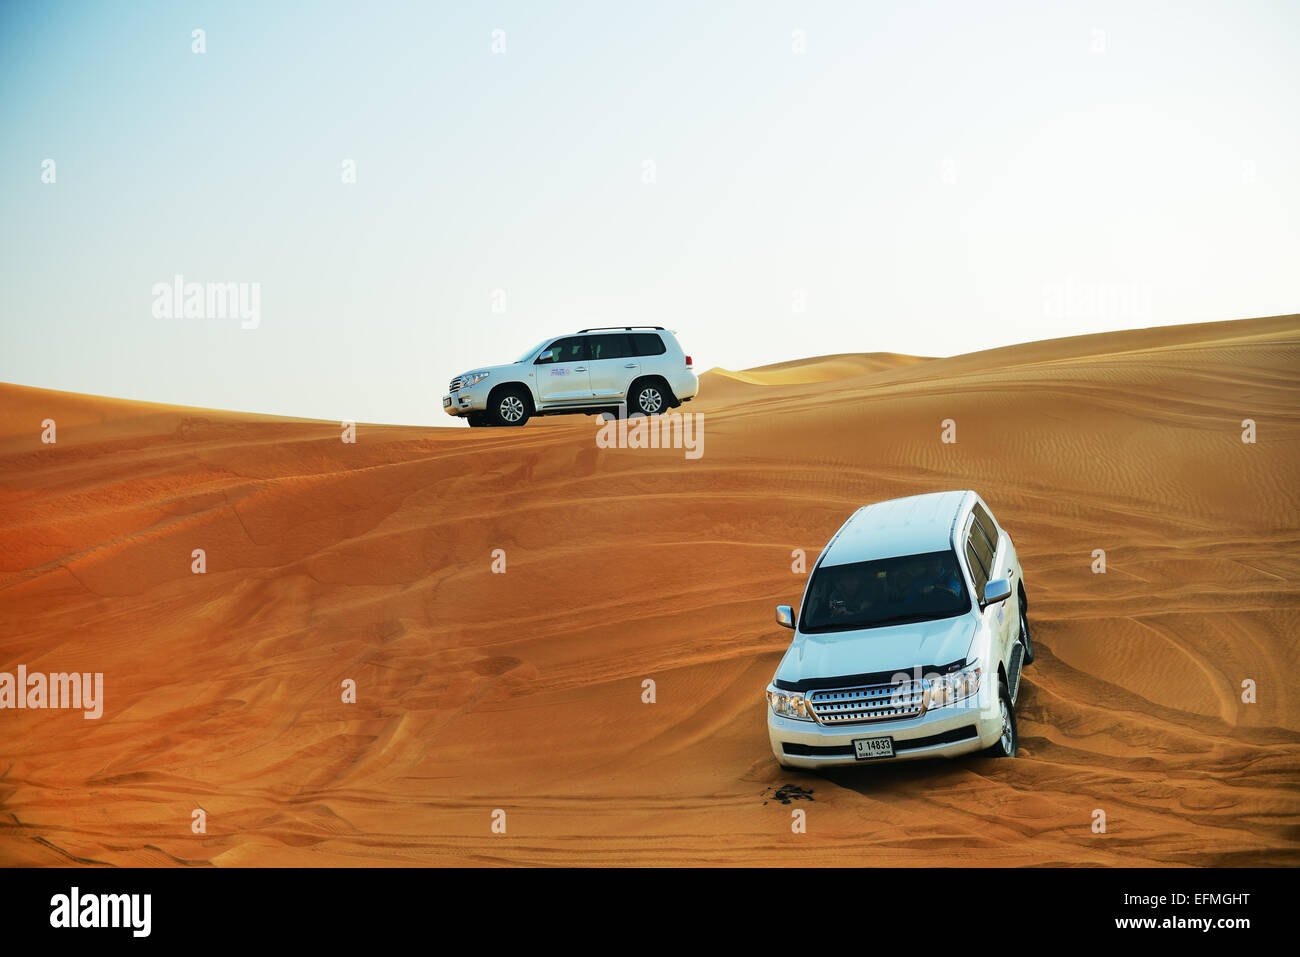 The Dubai desert trip in off-road car is major tourists attraction, UAE Stock Photo